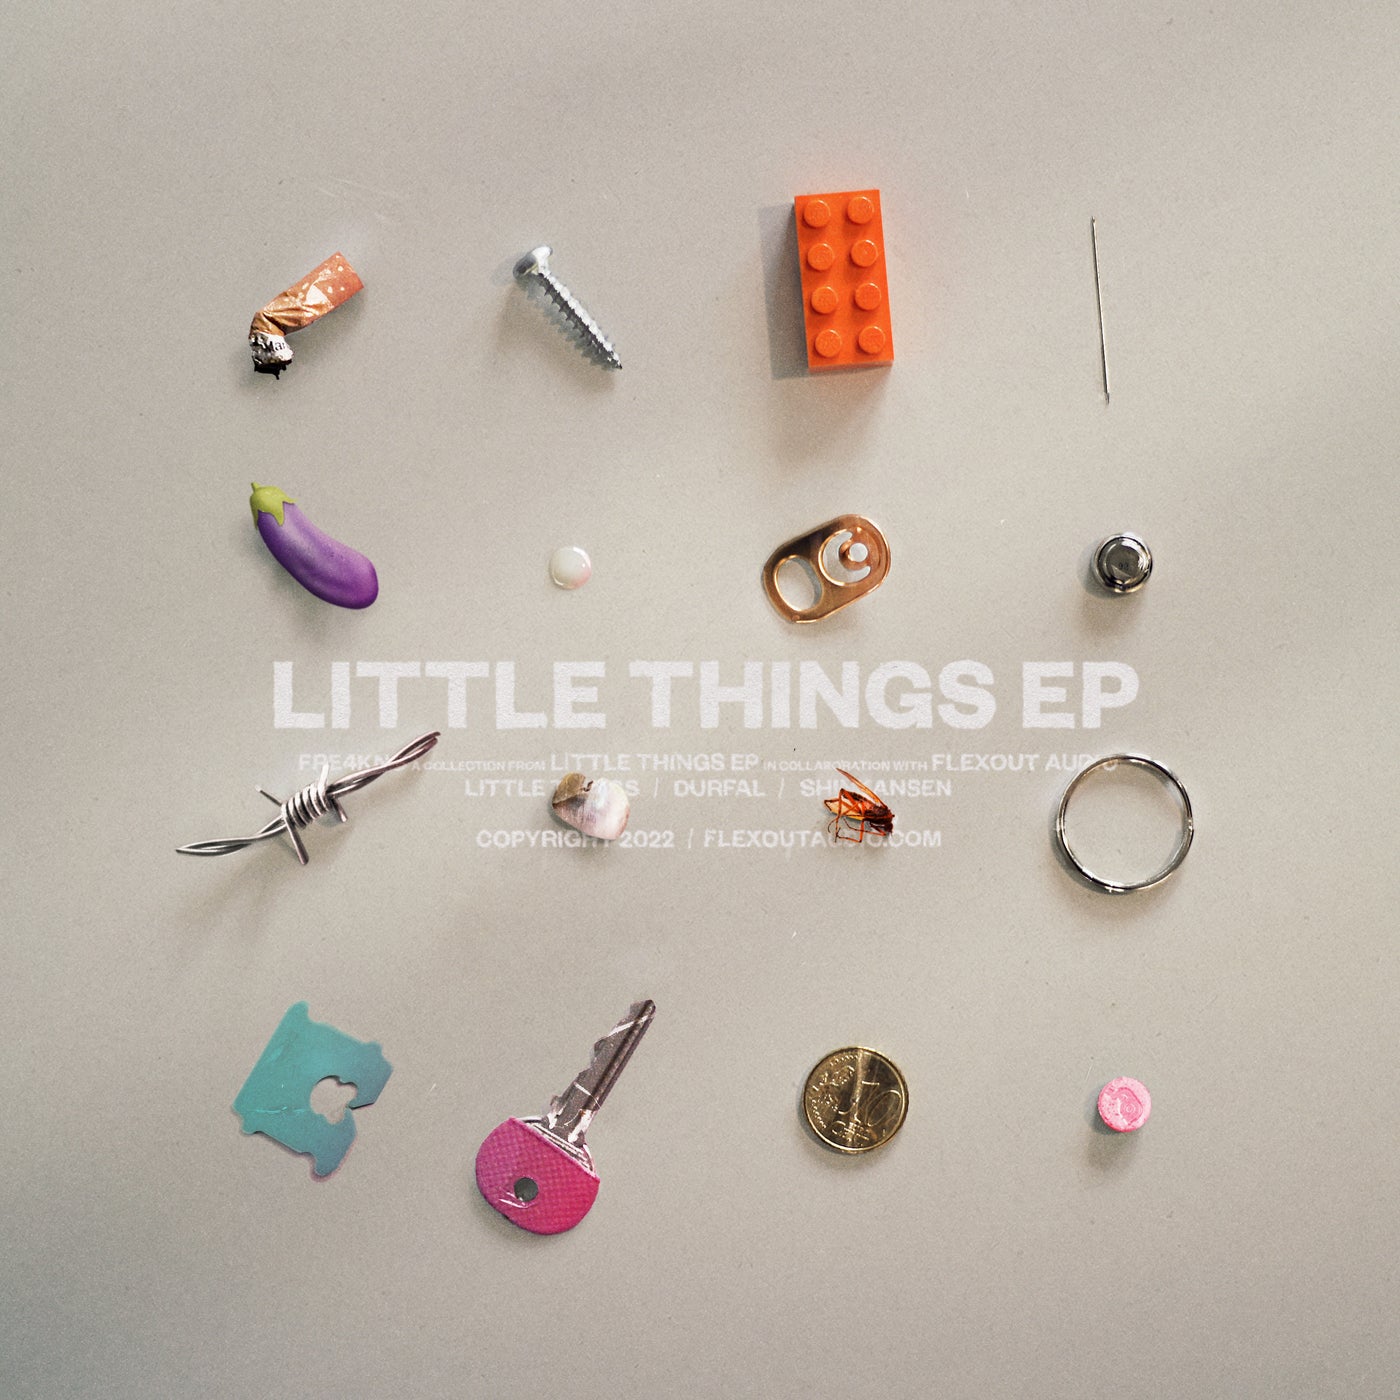 Little Things EP